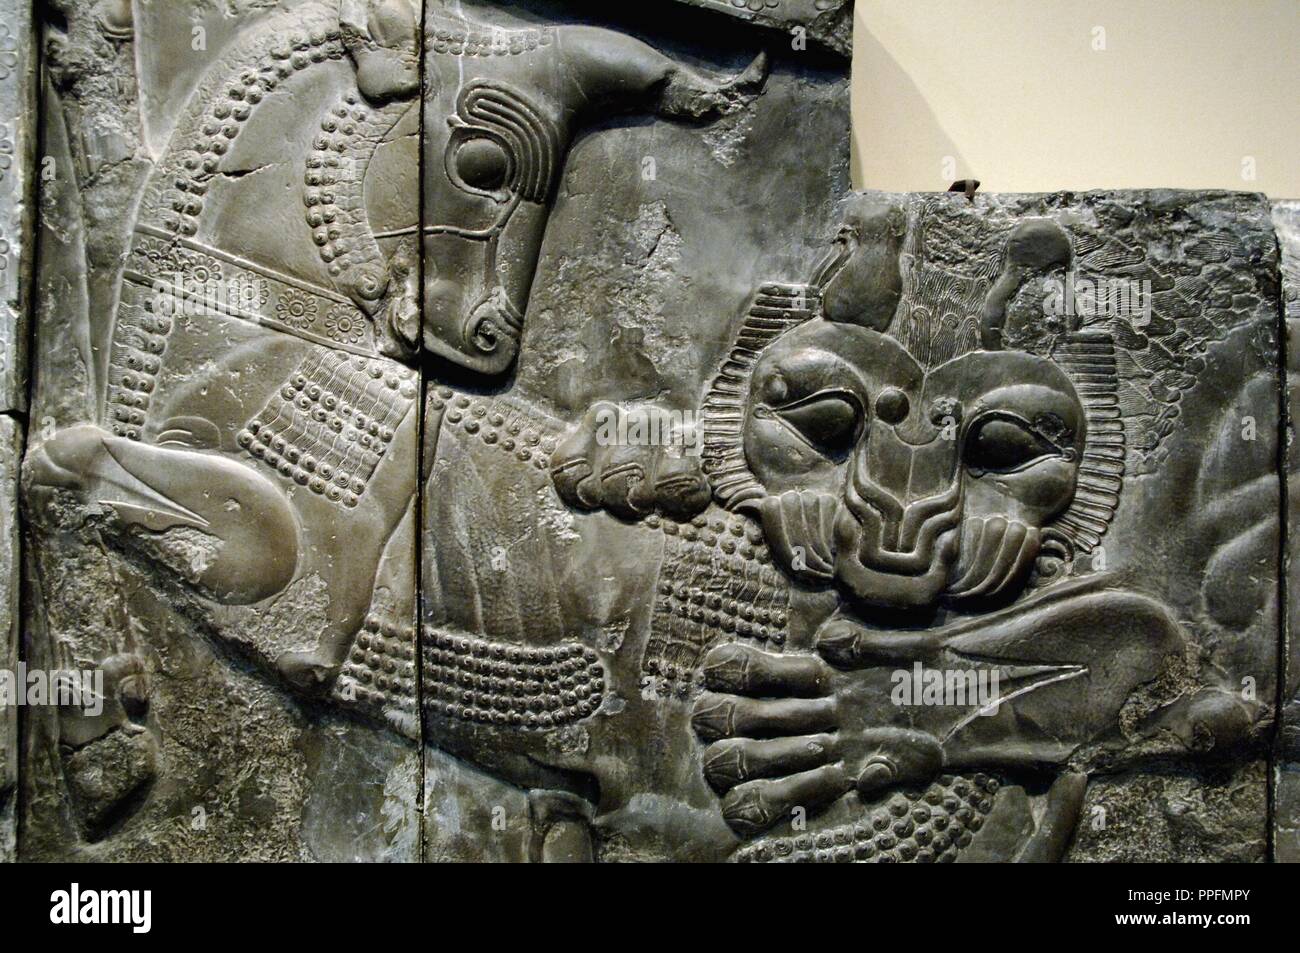 Palace of Darius I (522-486 BC). Reliefs of the outer wall of the staircase of the Apadana or Reception hall depicting a fight between a lion and a bull. Persepolis. Copy by the original preserved in their original place (Iran), 1892. British Museum. London. England. United Kingdom. Stock Photo